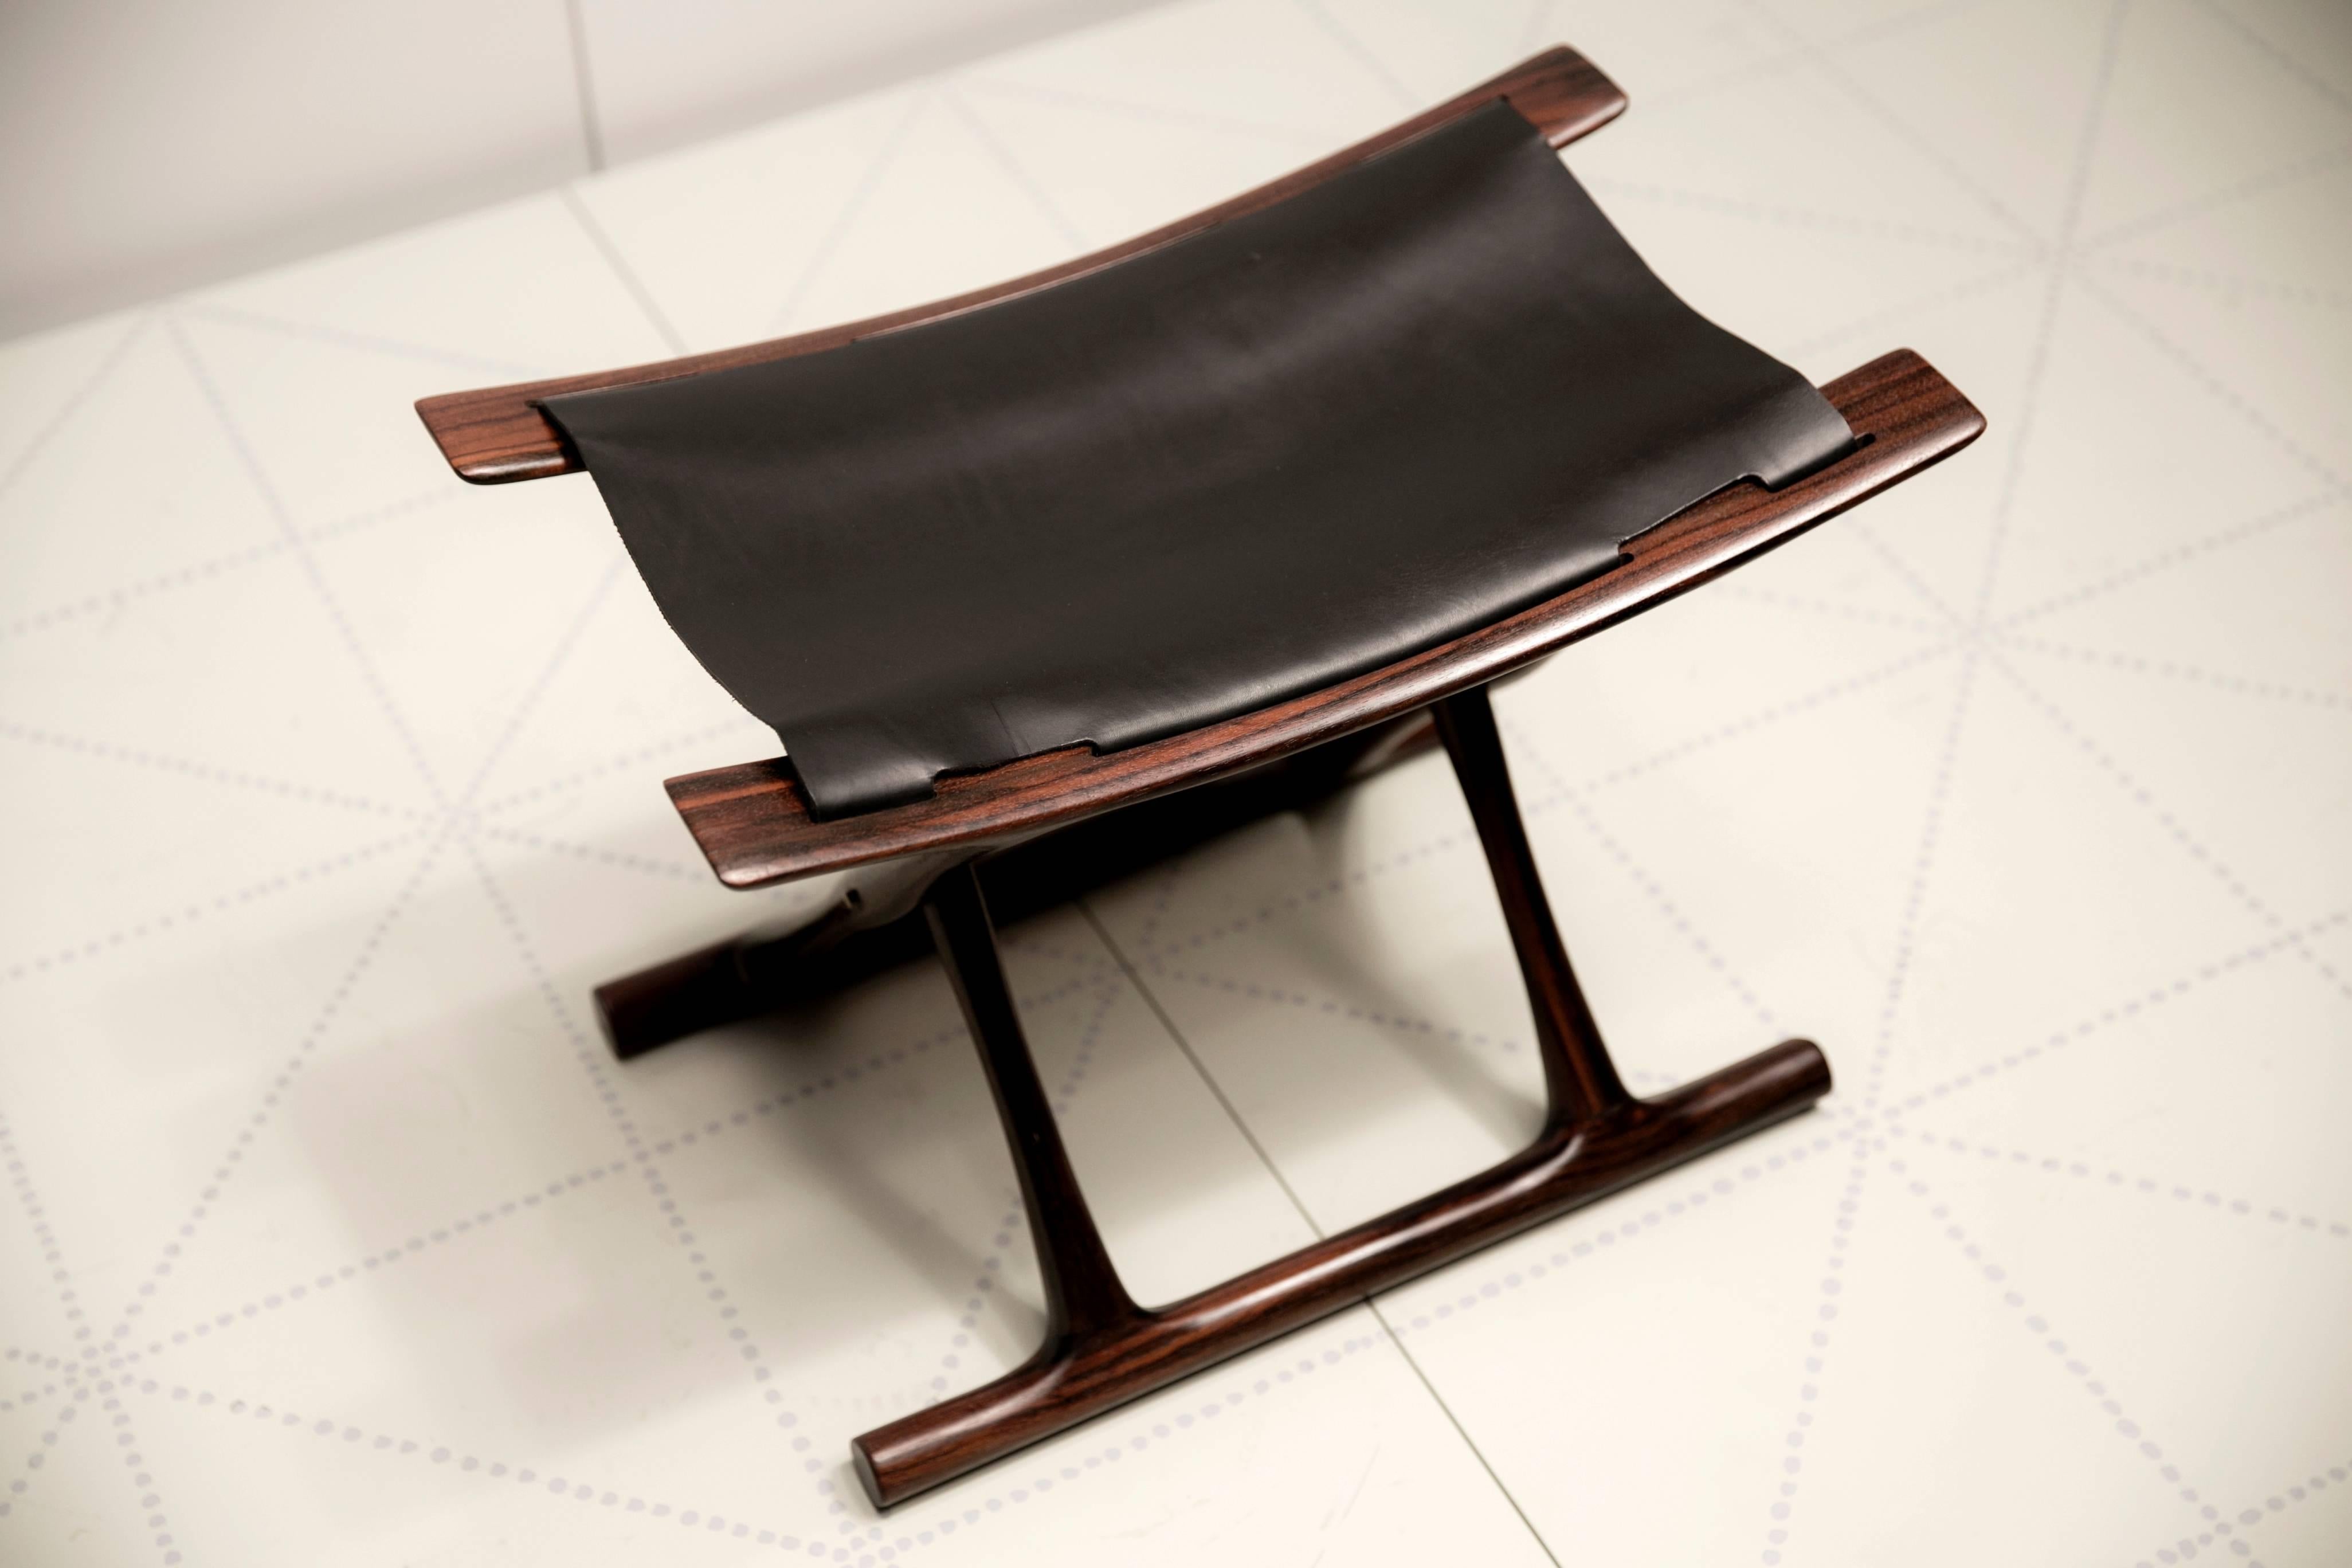 Cabinetmaker P.J. Furniture, Copenhagen (cabinetmaker's plaque on the underside of the stool).

Designed 1957; this stool made in 2000.

Indian rosewood, black leather (additional matching examples are available in both rosewood and